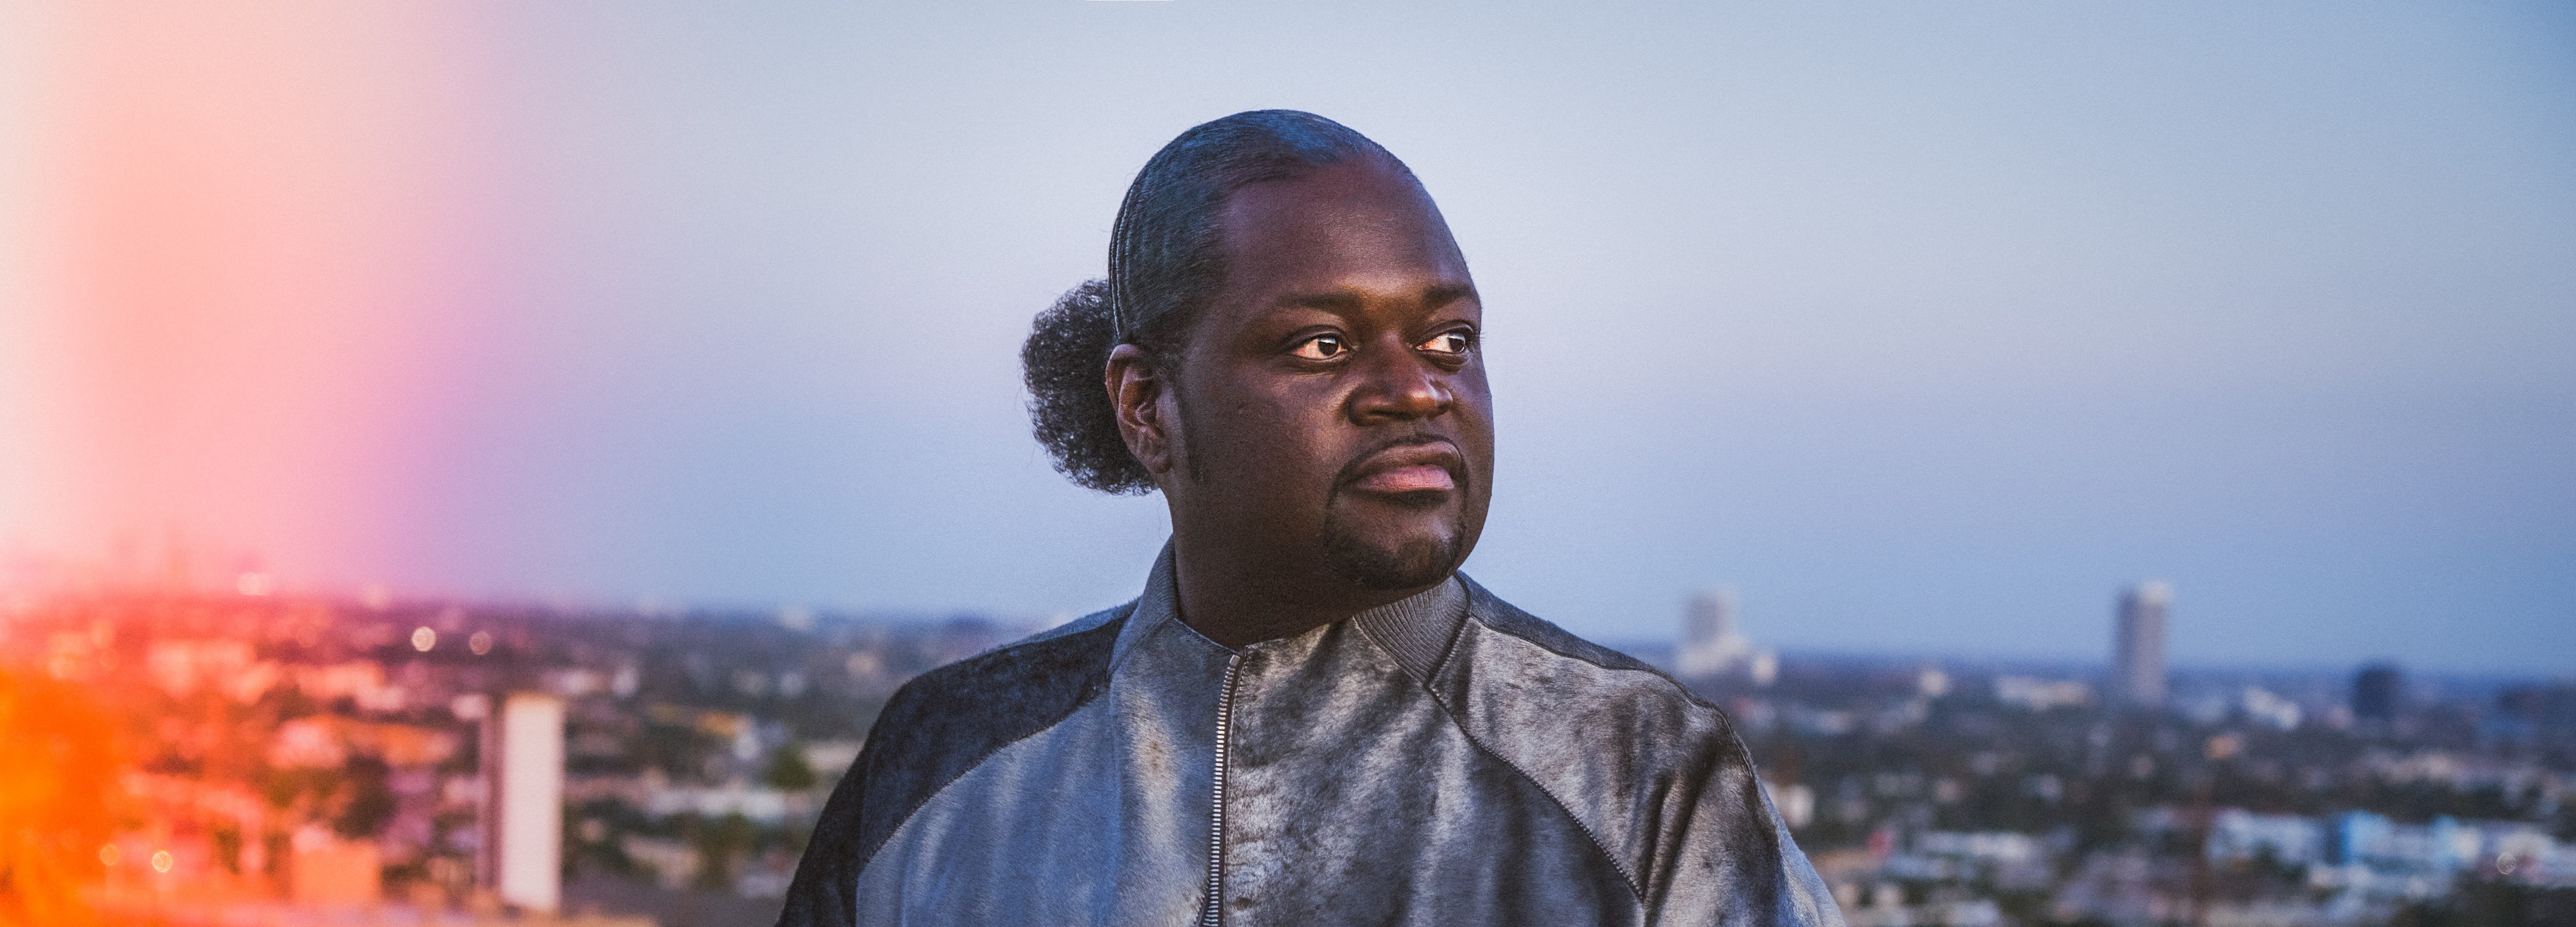 Meet Poo Bear, The Most Famous Songwriter You’ve Never Heard Of